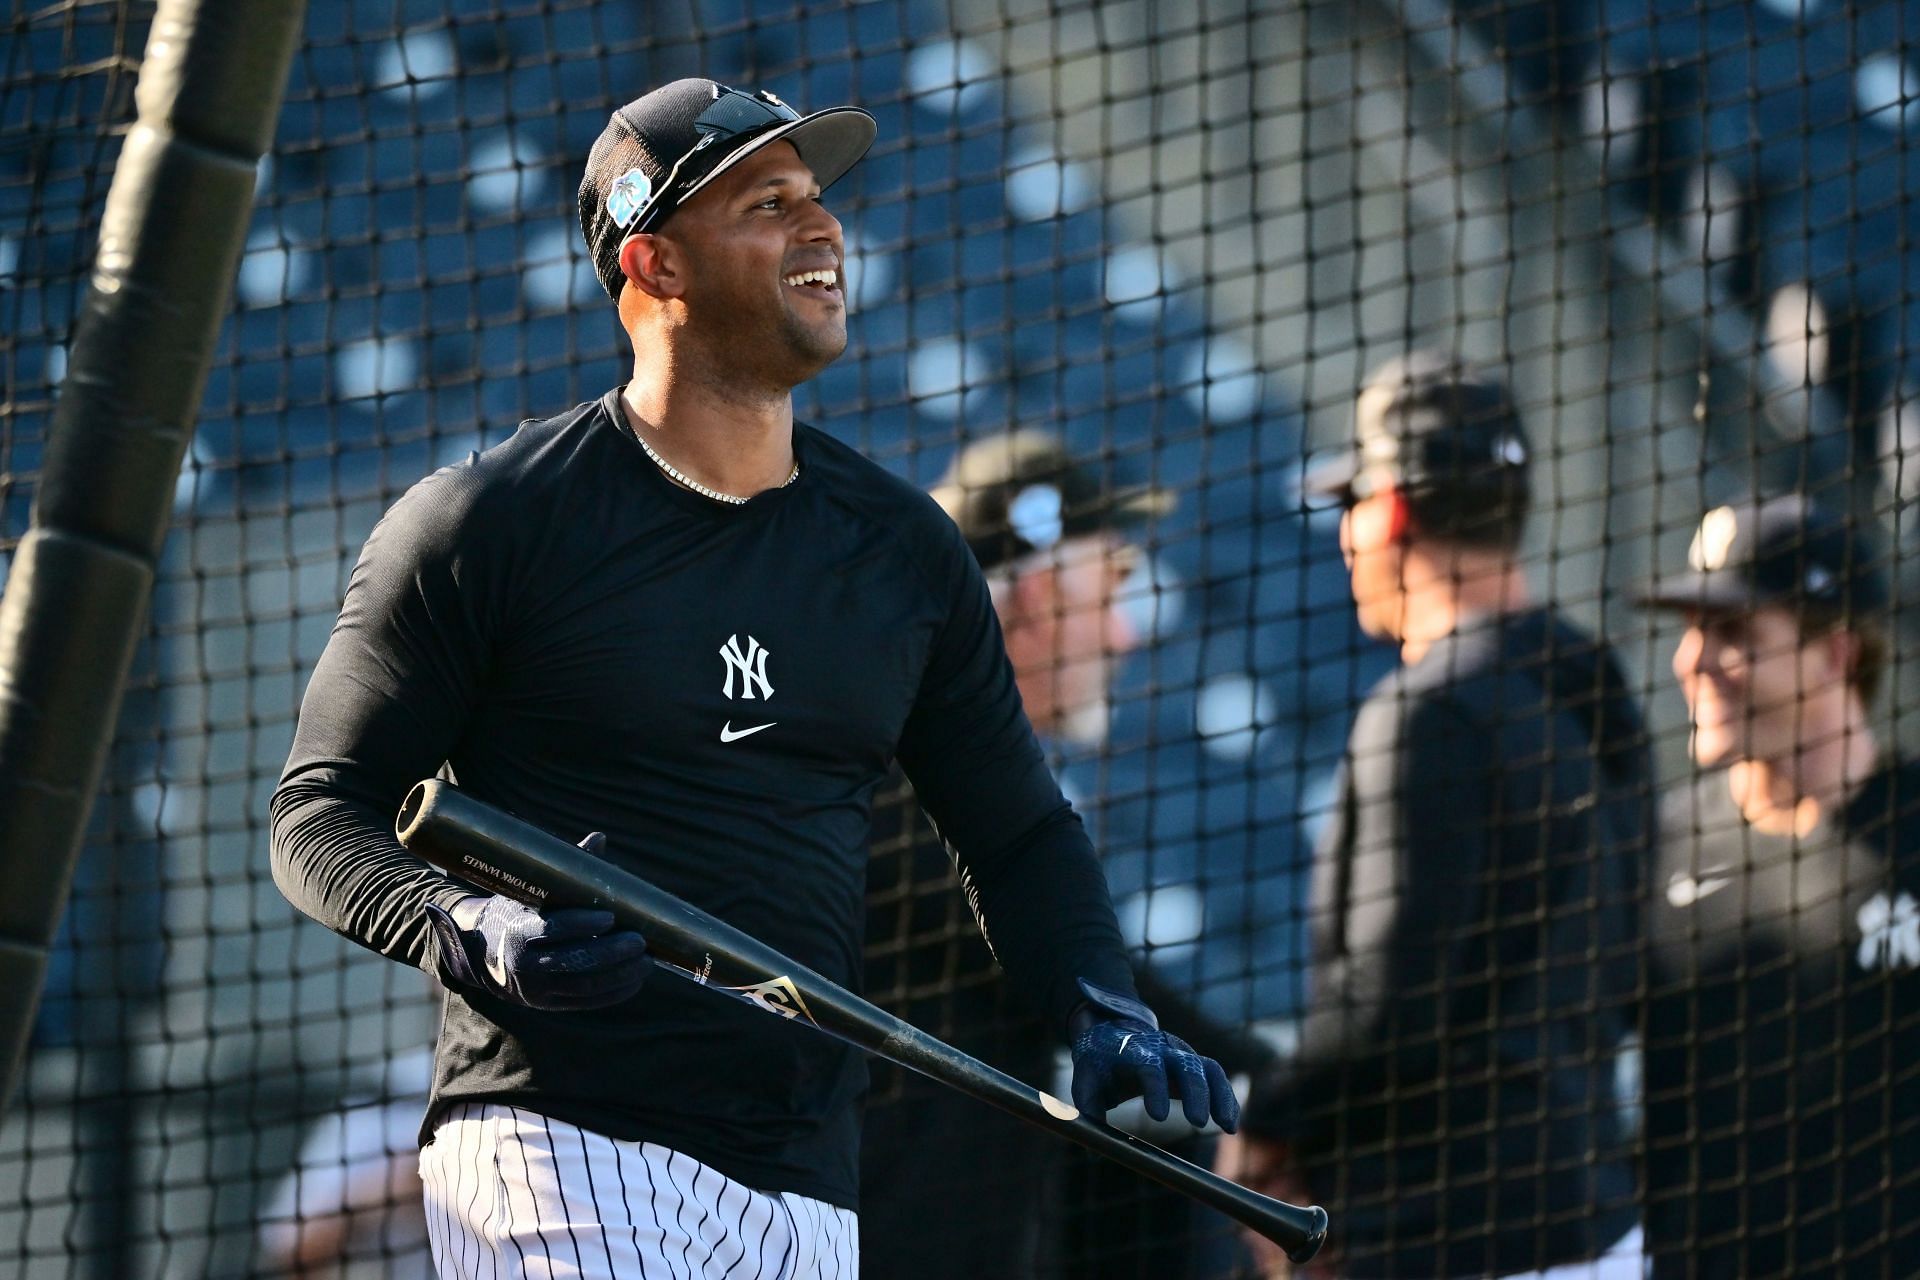 Aaron Hicks of the New York Yankees looks on during batting practice.